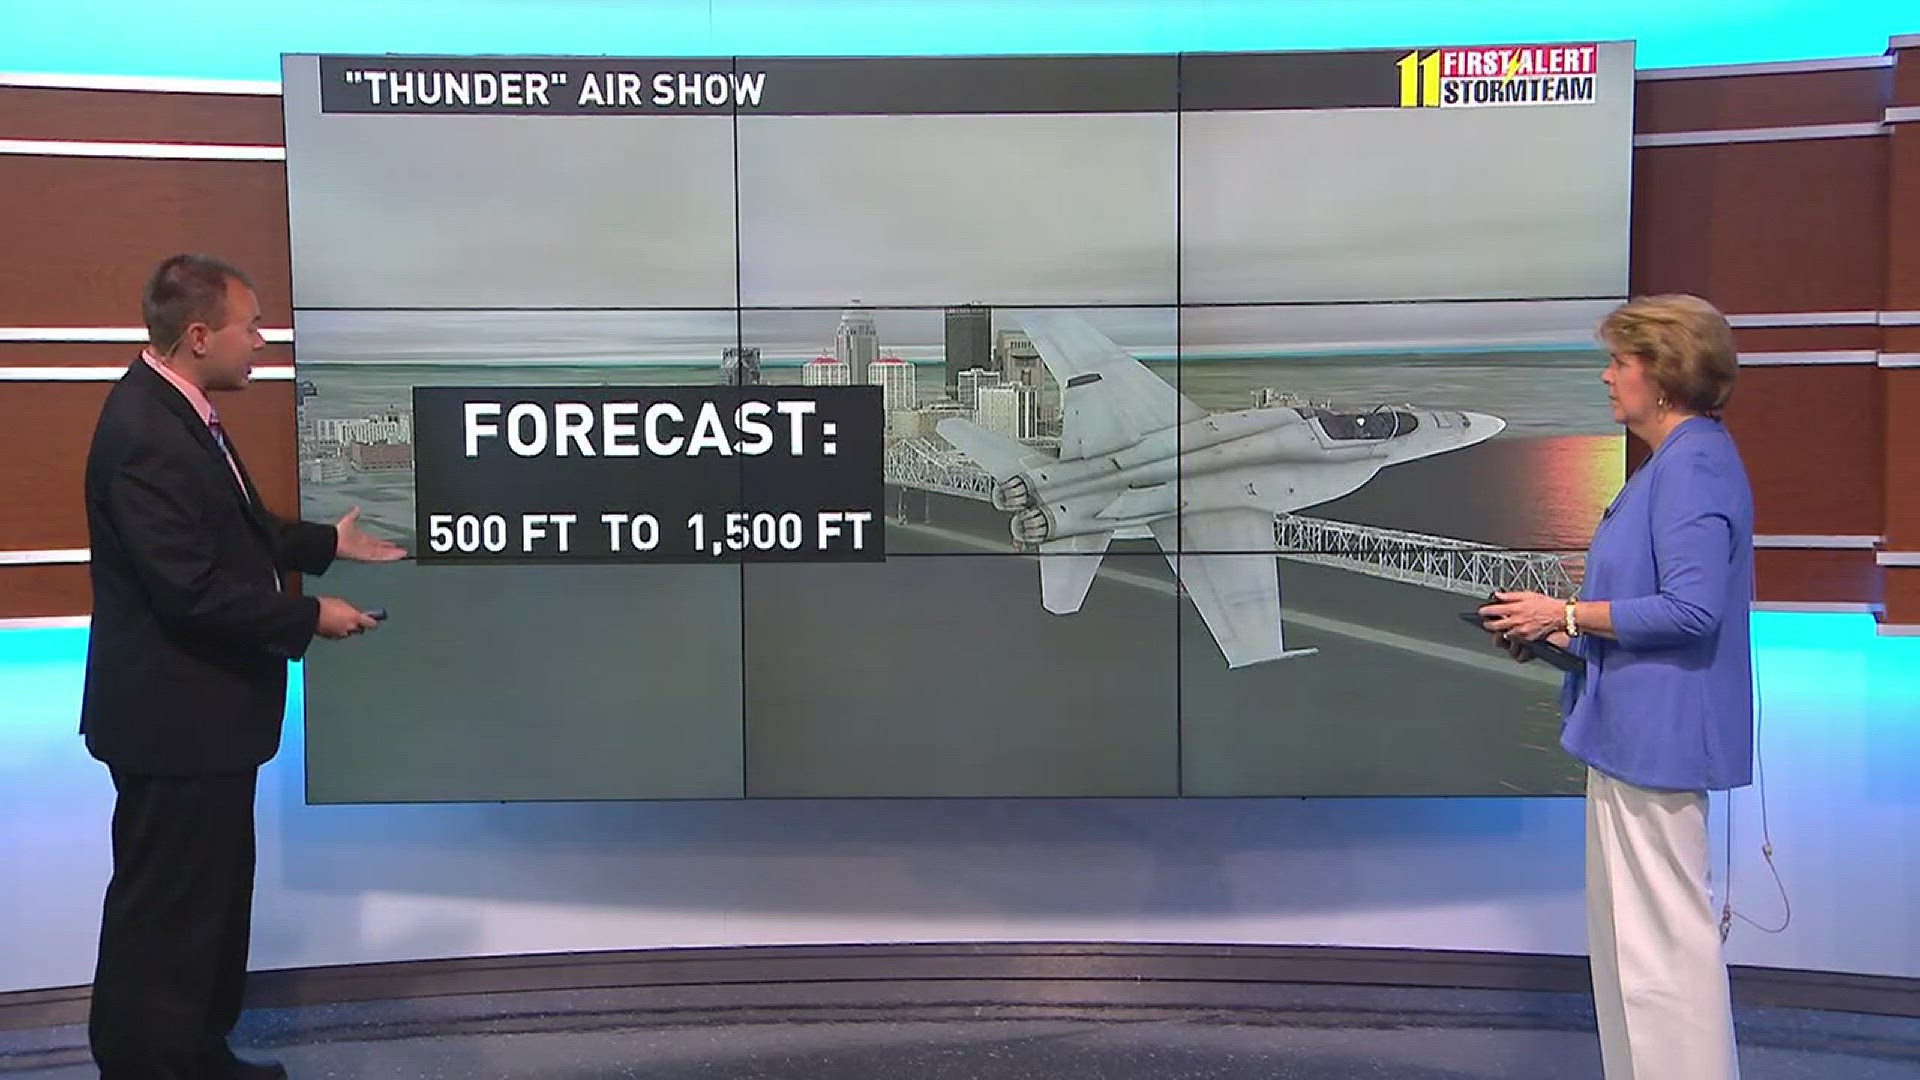 The Storm Team Forecast on Saturday's rain, and low clouds. A look at what impact it could have on the air show.